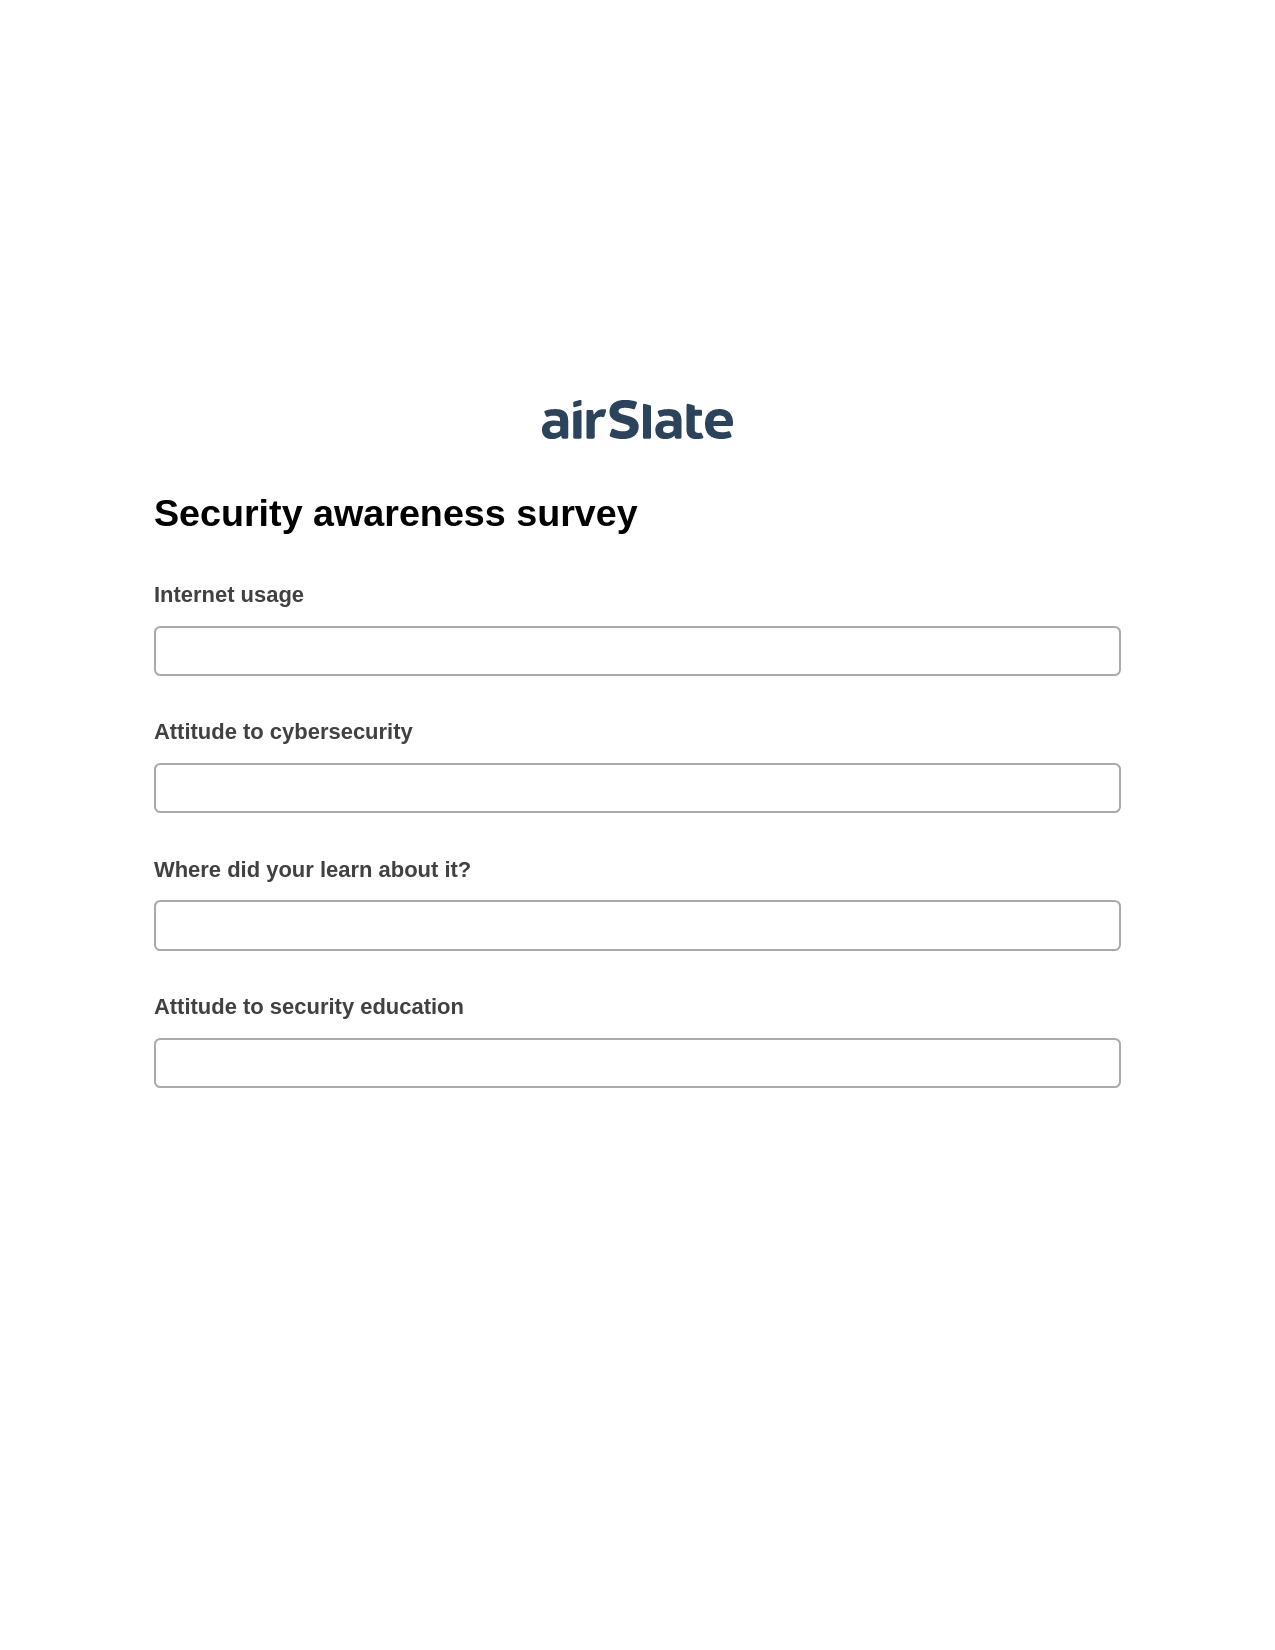 Multirole Security awareness survey Pre-fill from CSV File Bot, Create Salesforce Record Bot, Archive to SharePoint Folder Bot